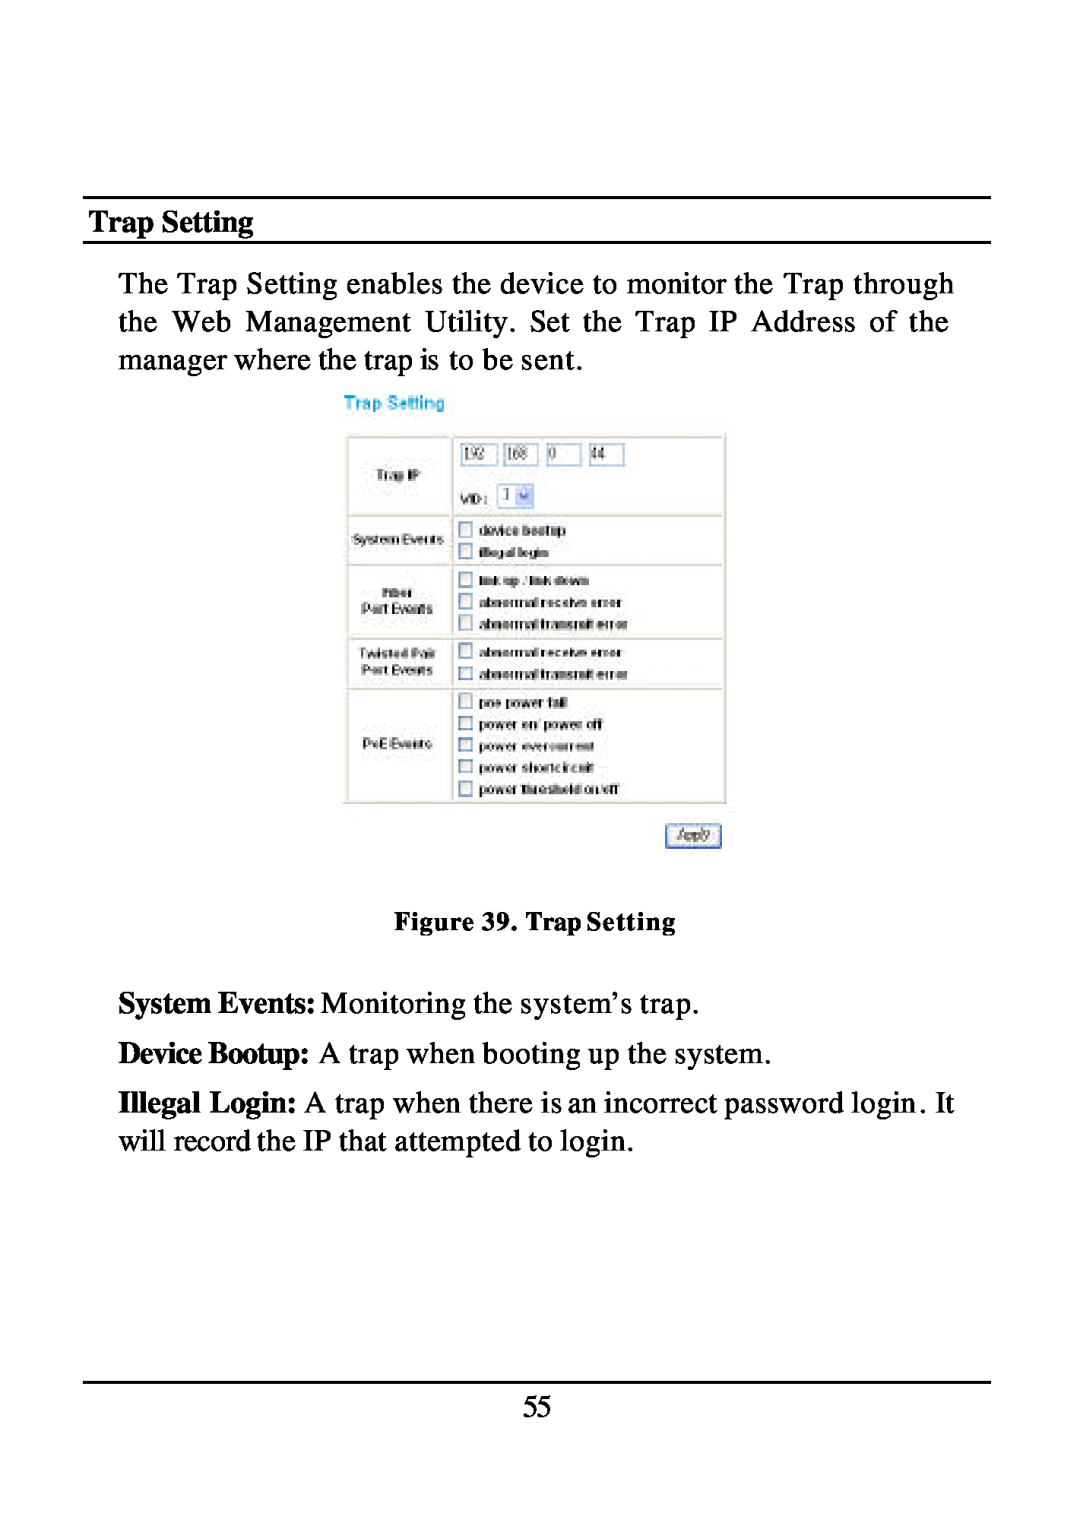 D-Link DES-1526 Trap Setting, System Events Monitoring the system’s trap, Device Bootup A trap when booting up the system 